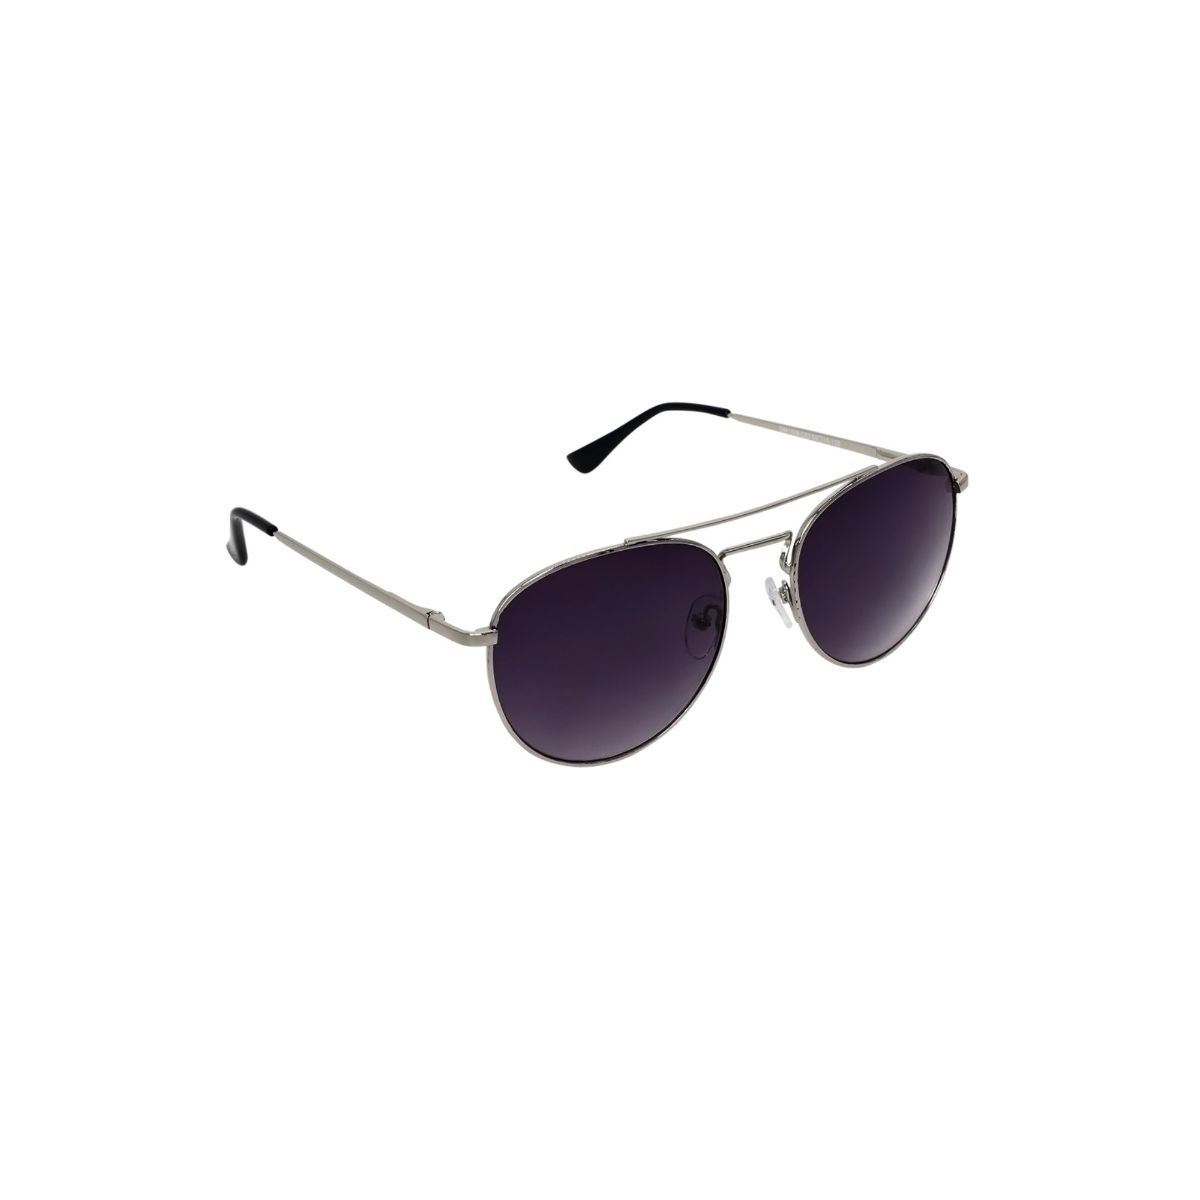 Buy GIO COLLECTION Women Round Sunglasses - Sunglasses for Women 9163567 |  Myntra